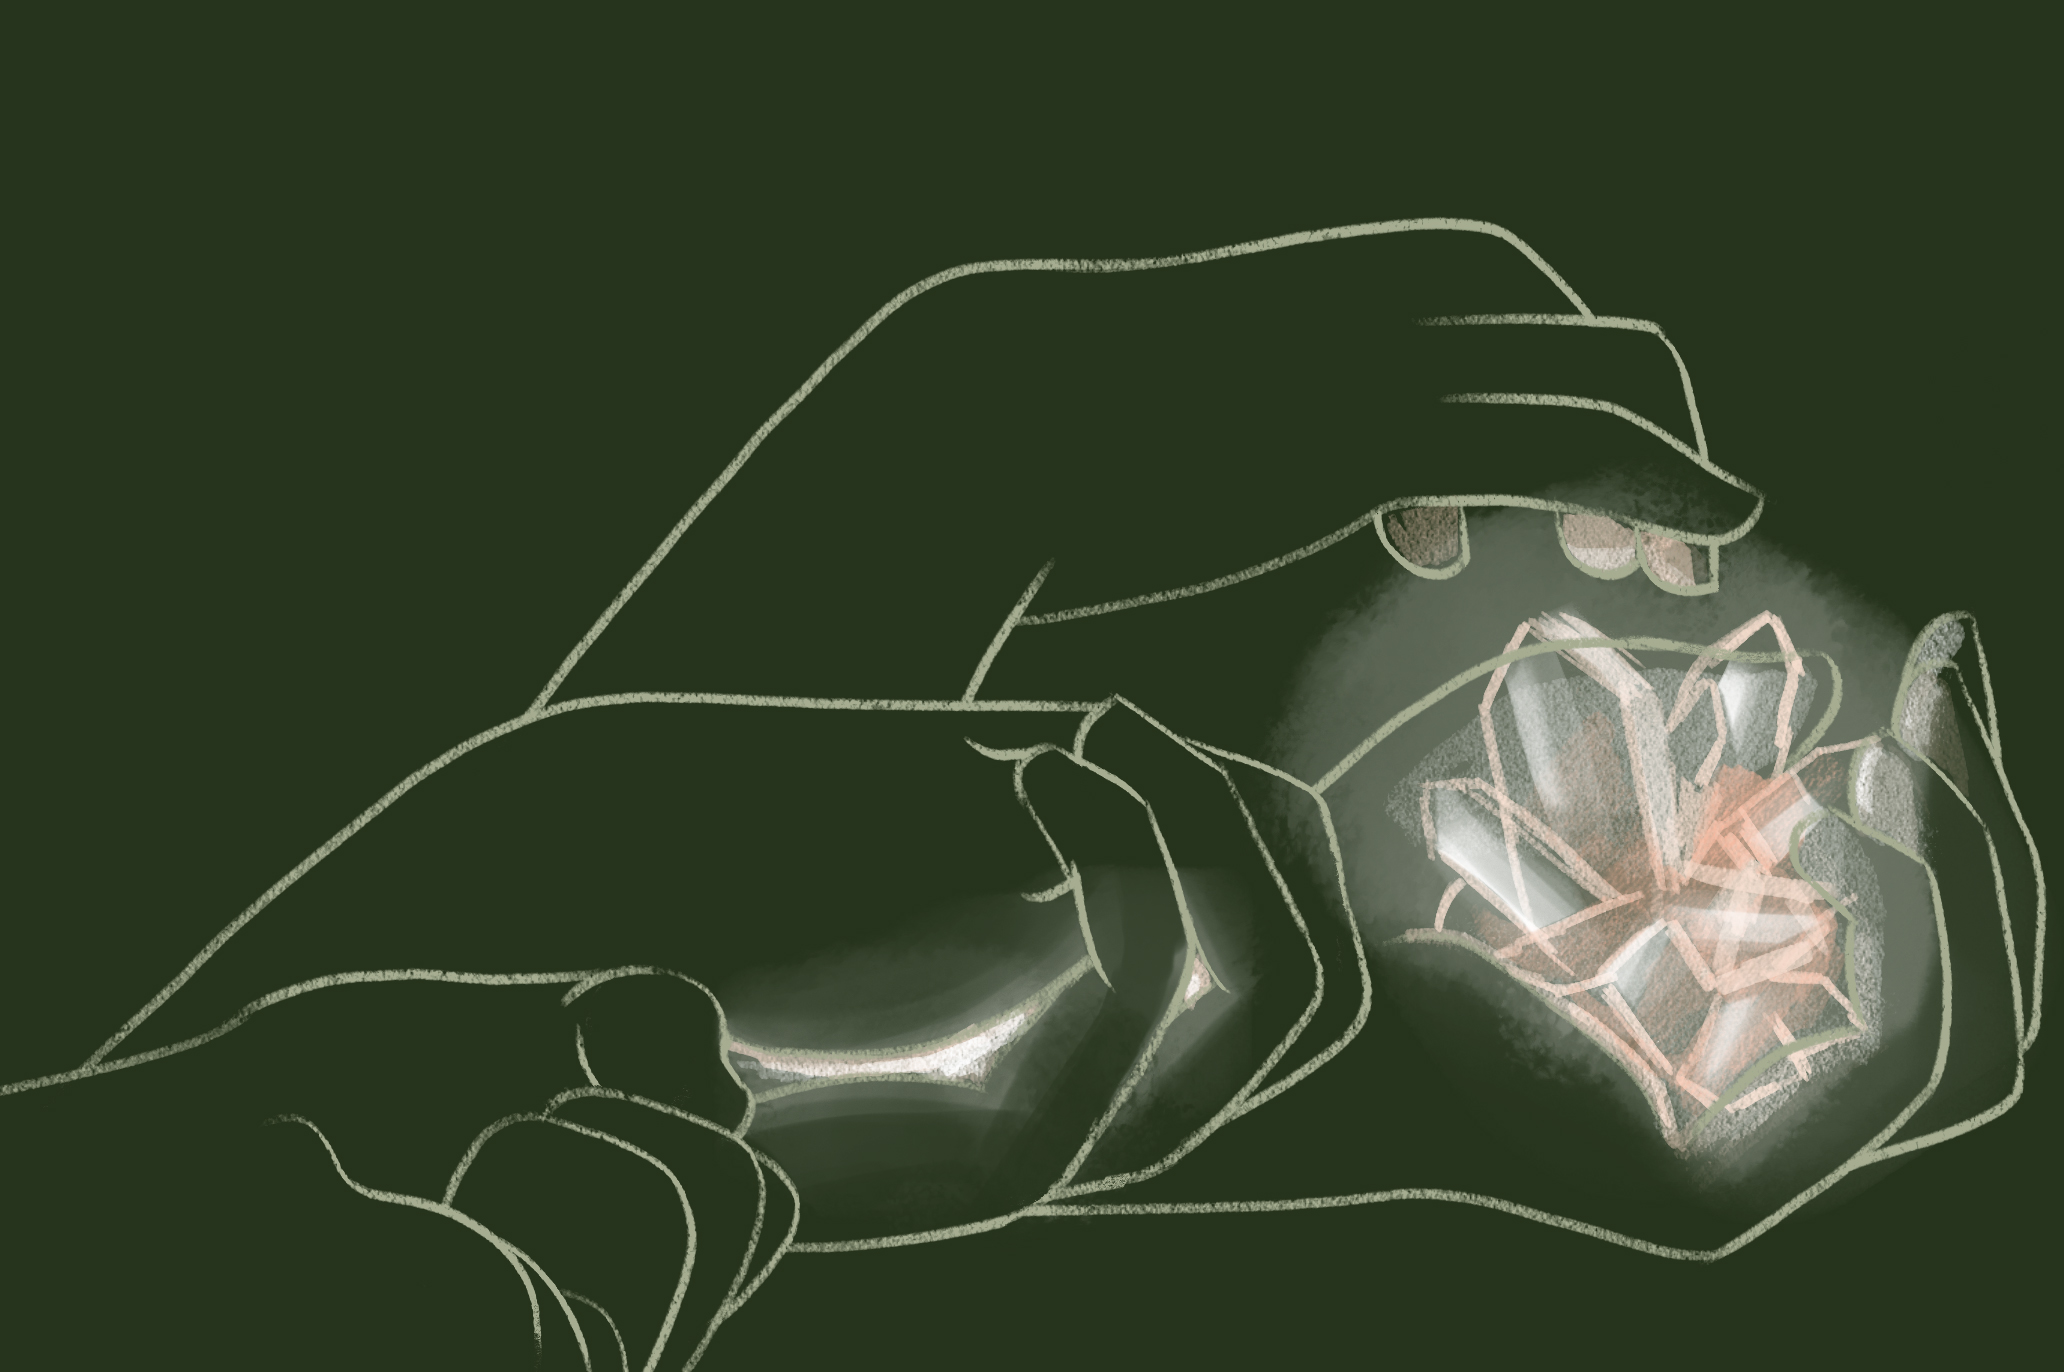 Image: An illustration of a three pairs of hands in progression from closed, slightly open, to fully open revealing many white, glowing crystals. The background is plain dark green and the lines of the hands are drawn in white. Illustration by Kiki Lechuga-Dupont, originally published for the article "Feasts, Fasts, and Excavations: Interview with Devyn Mañibo" by Maya Simkin on August 2, 2019.